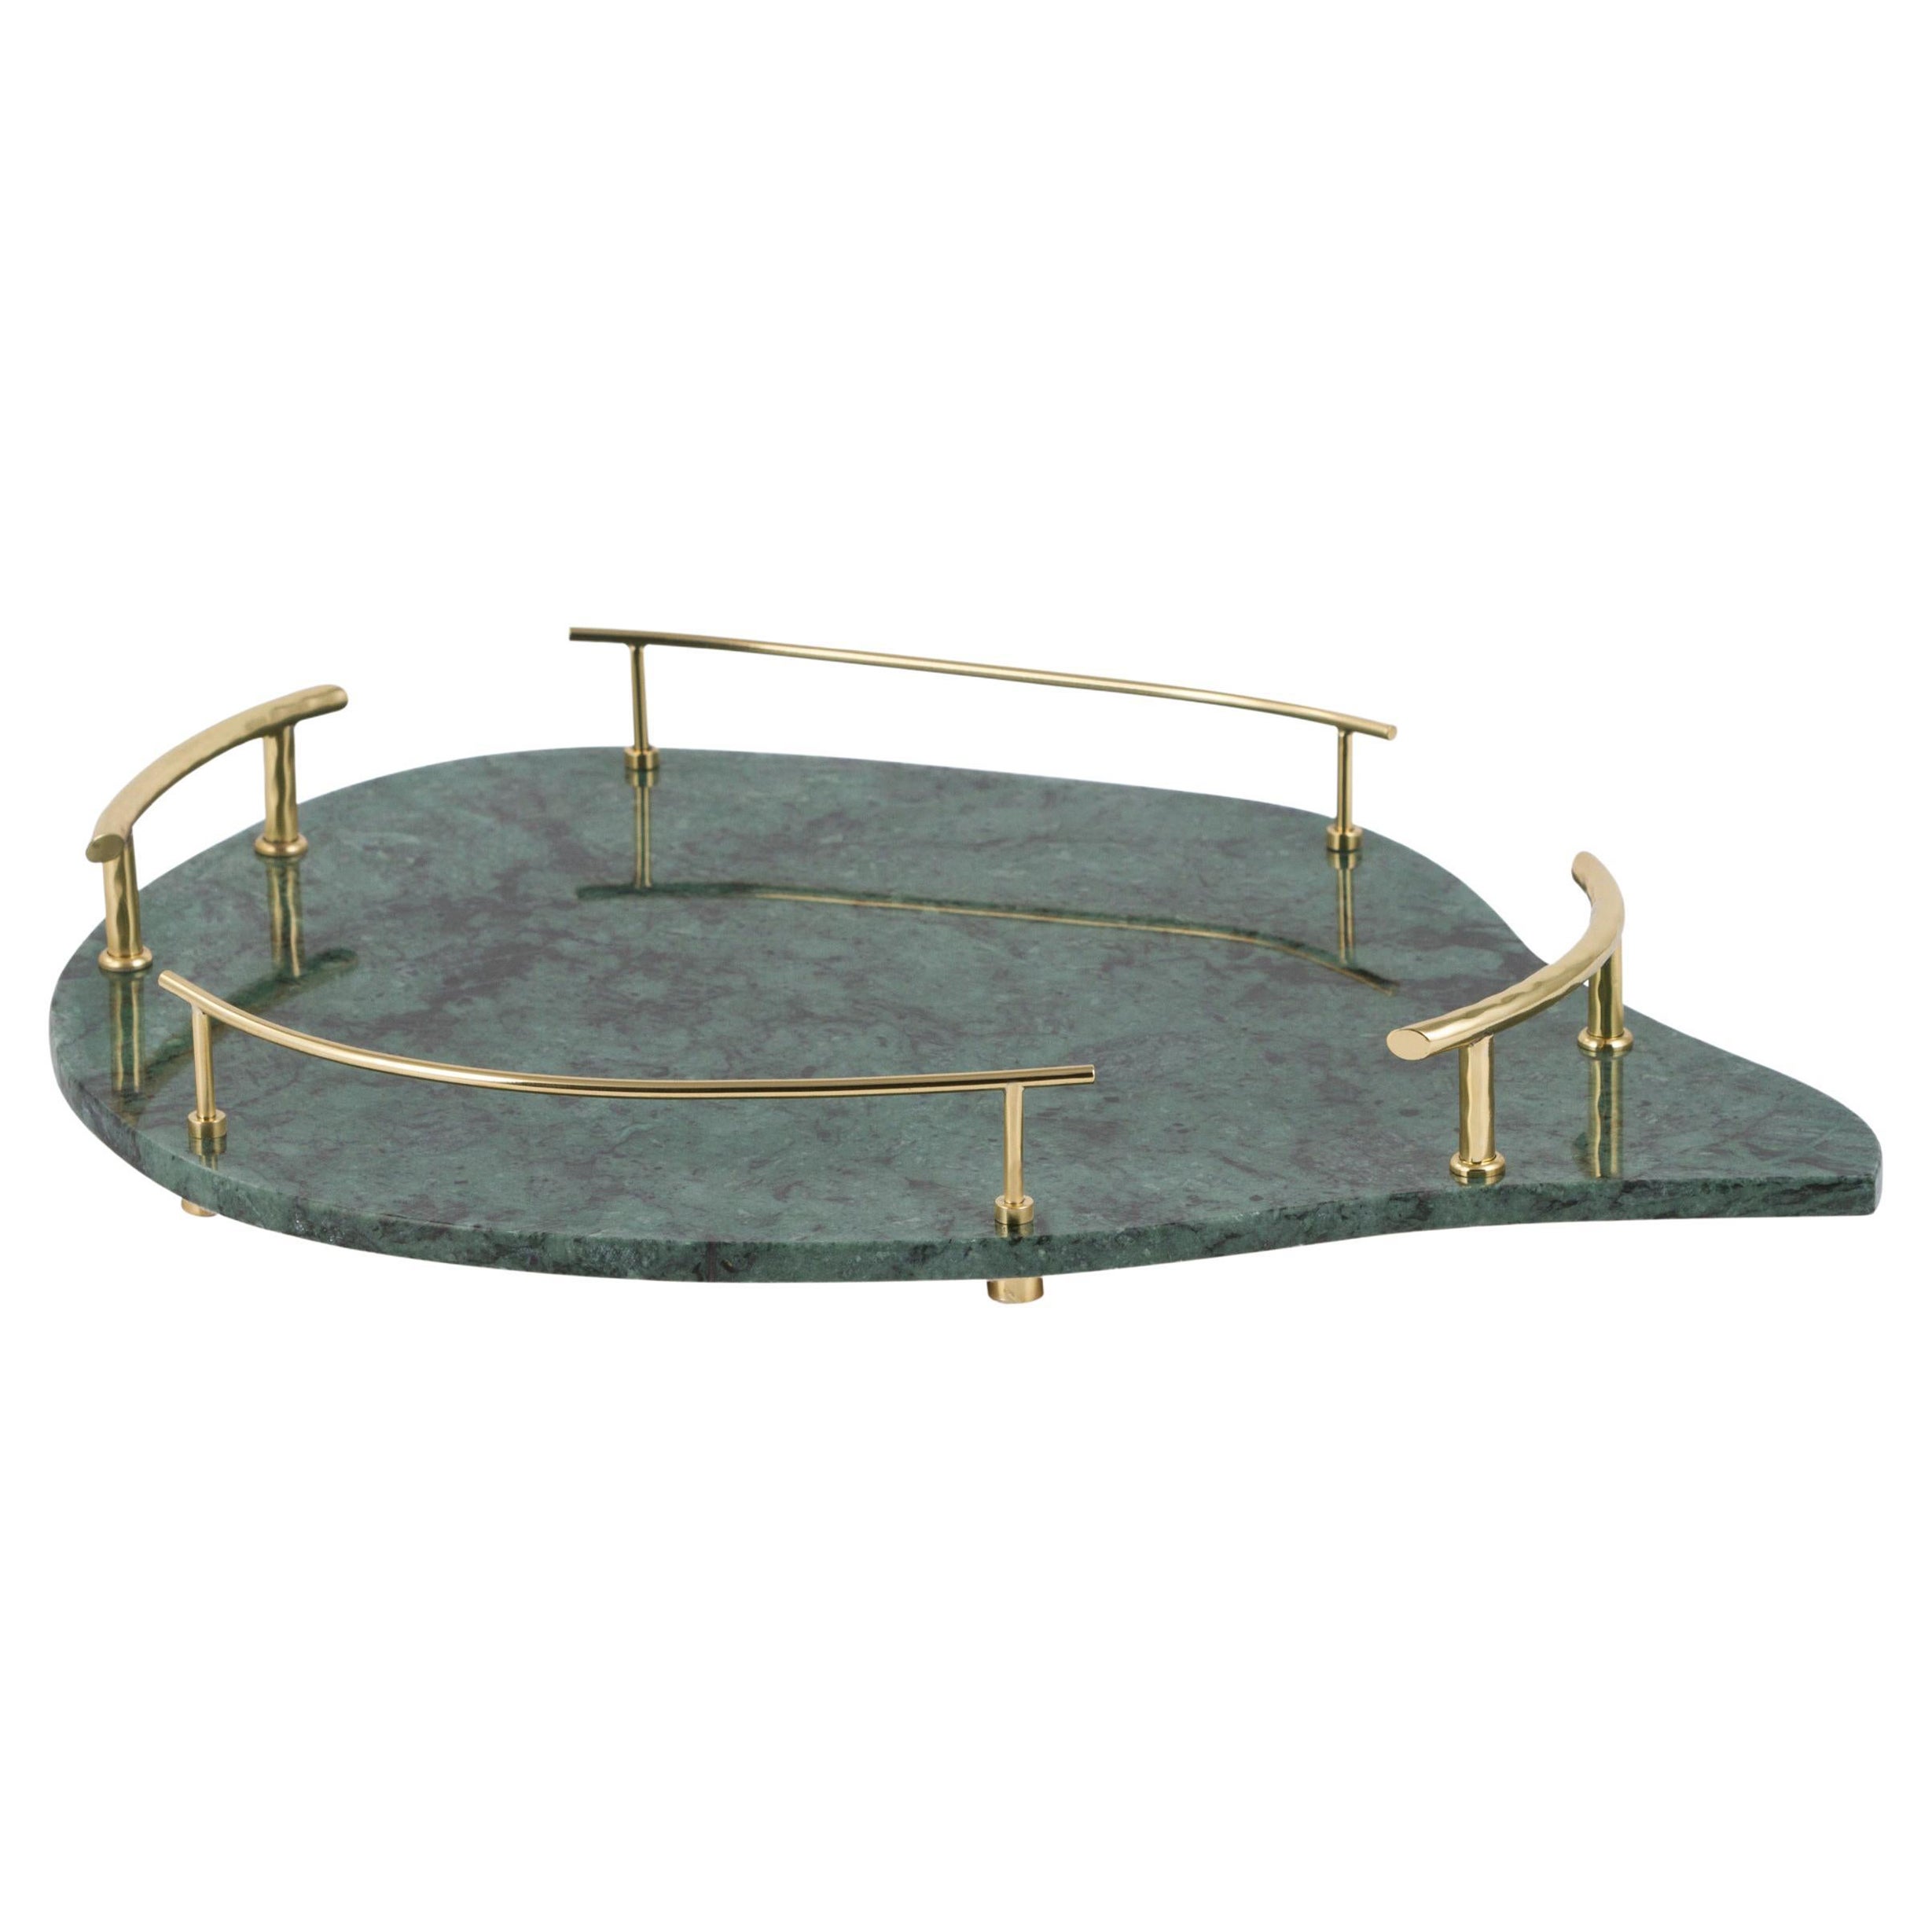 Serving Tray Sakai, Green Marble, Handmade in Portugal by Lusitanus Home